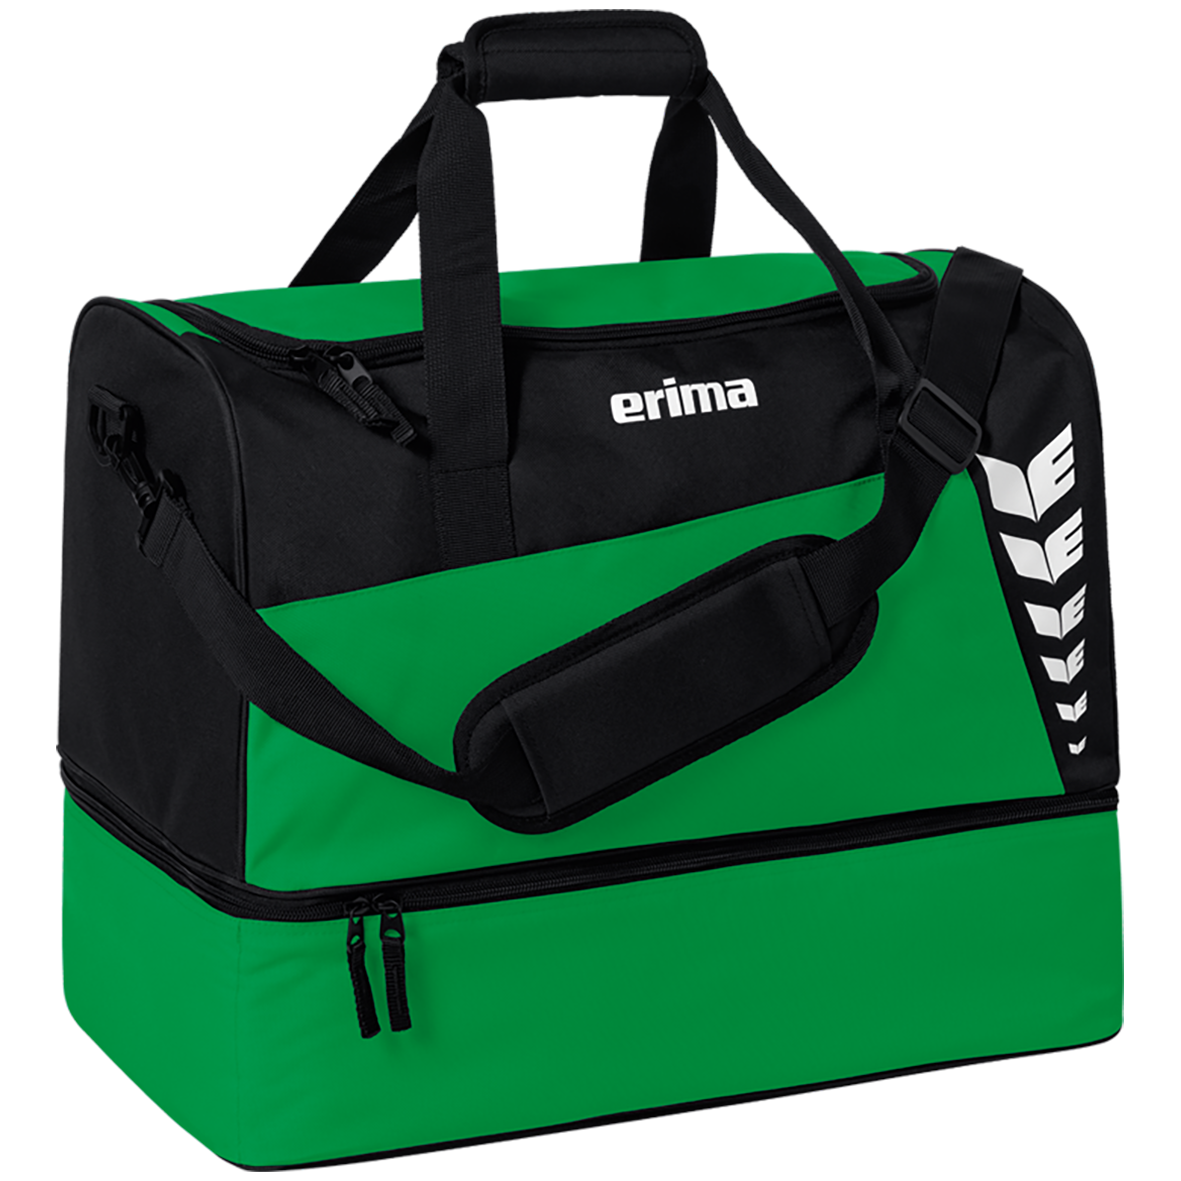 ERIMA SIX WINGS SPORTS BAG WITH BOTTOM COMPARTMENT, EMERALD-BLACK.